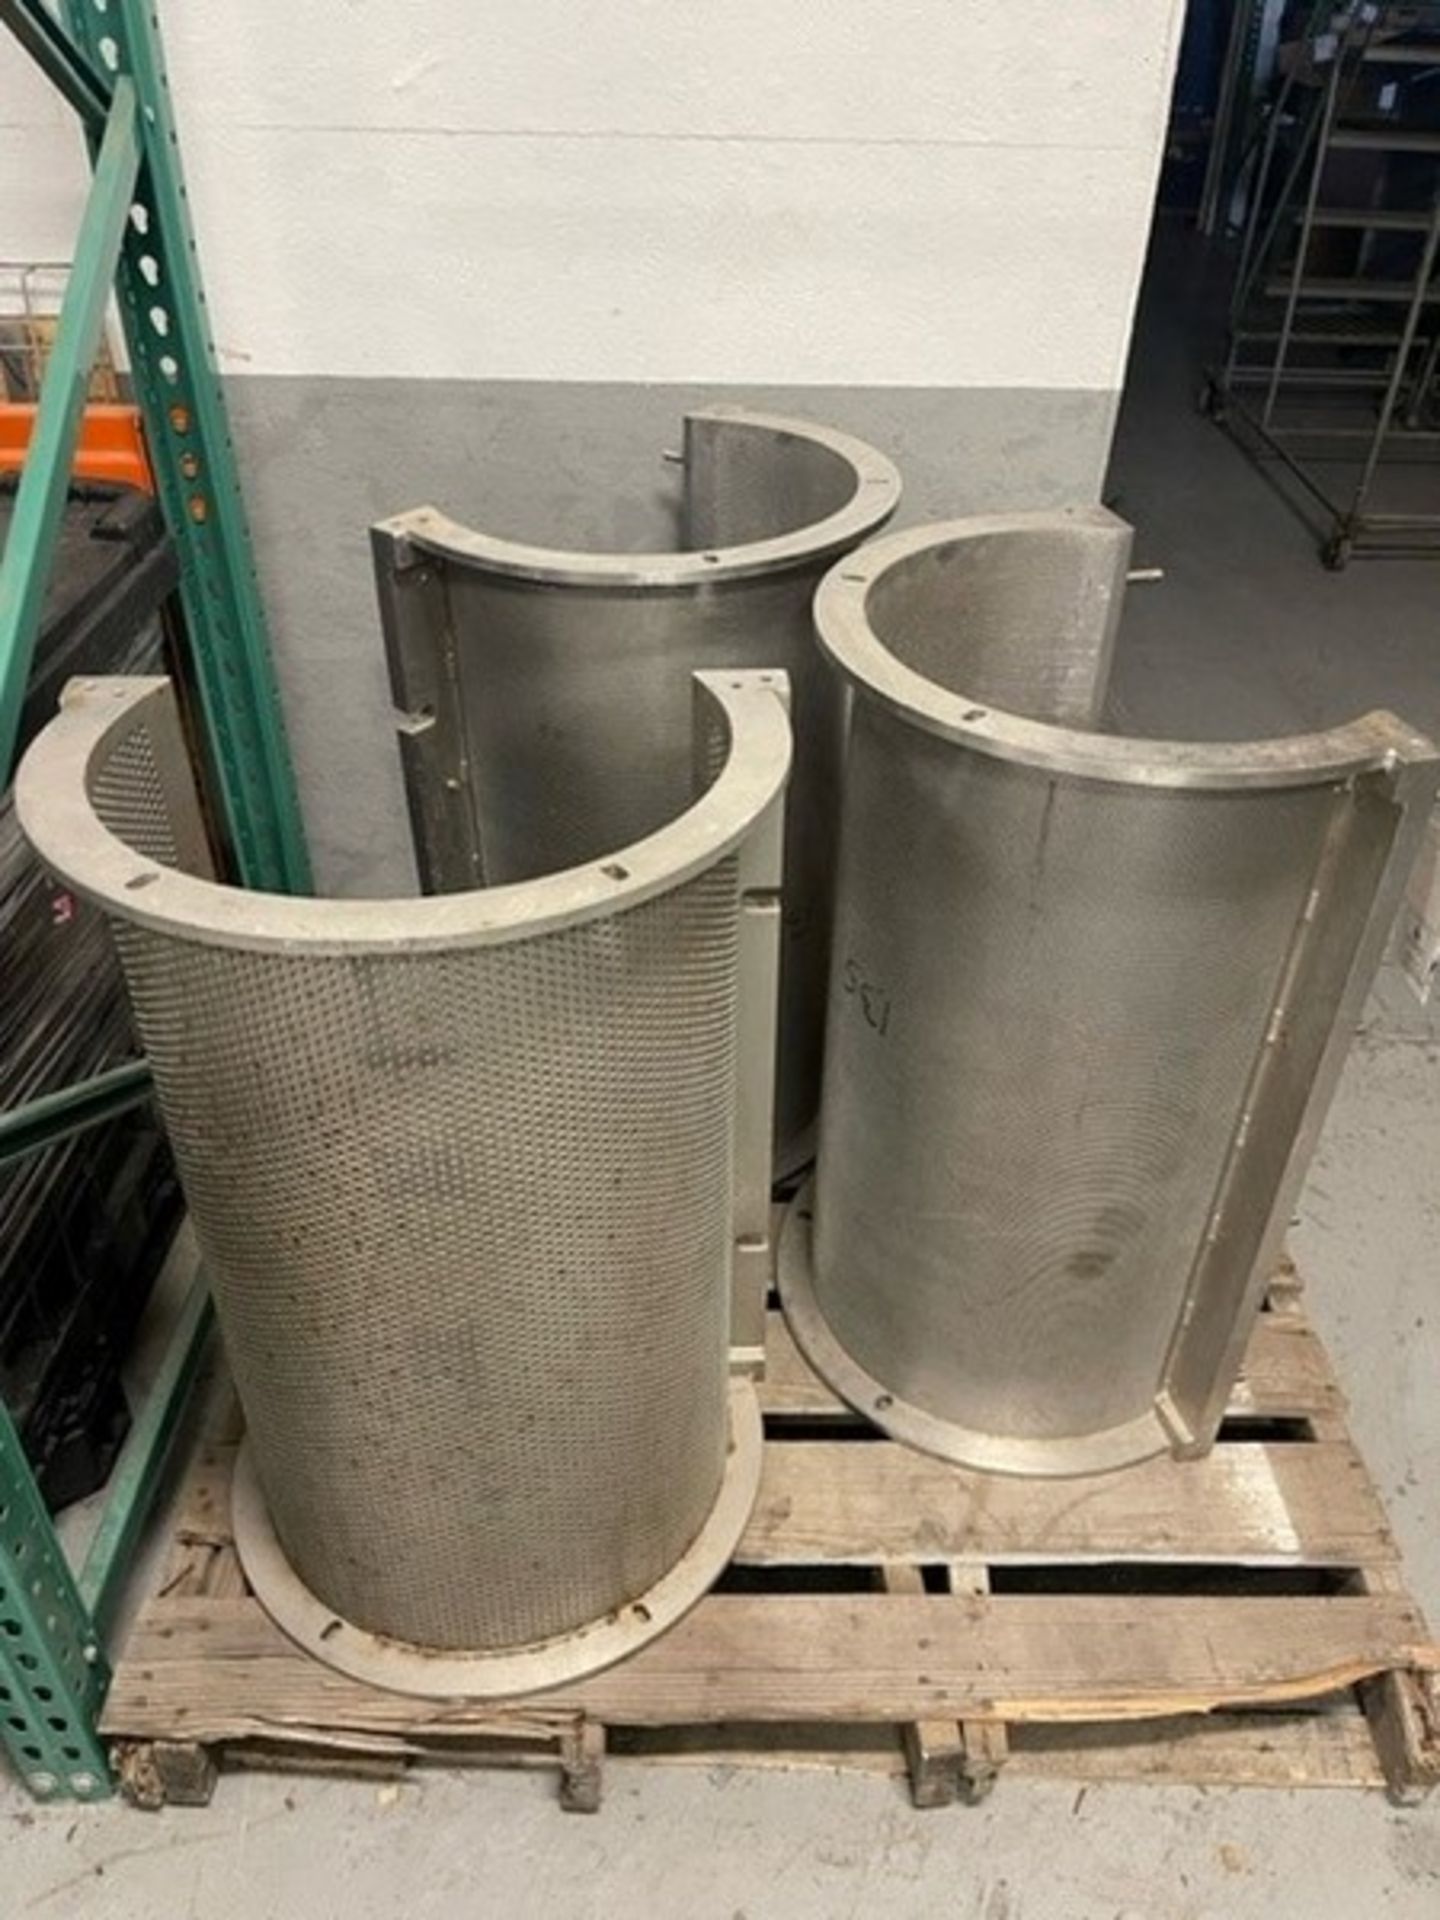 Lot of (3) Ahlstrom S/S Screens, Part No.: 2.0T6/2 26.10C4493-8748-1-2 & 6751-1-5, Dims.: Aprox.